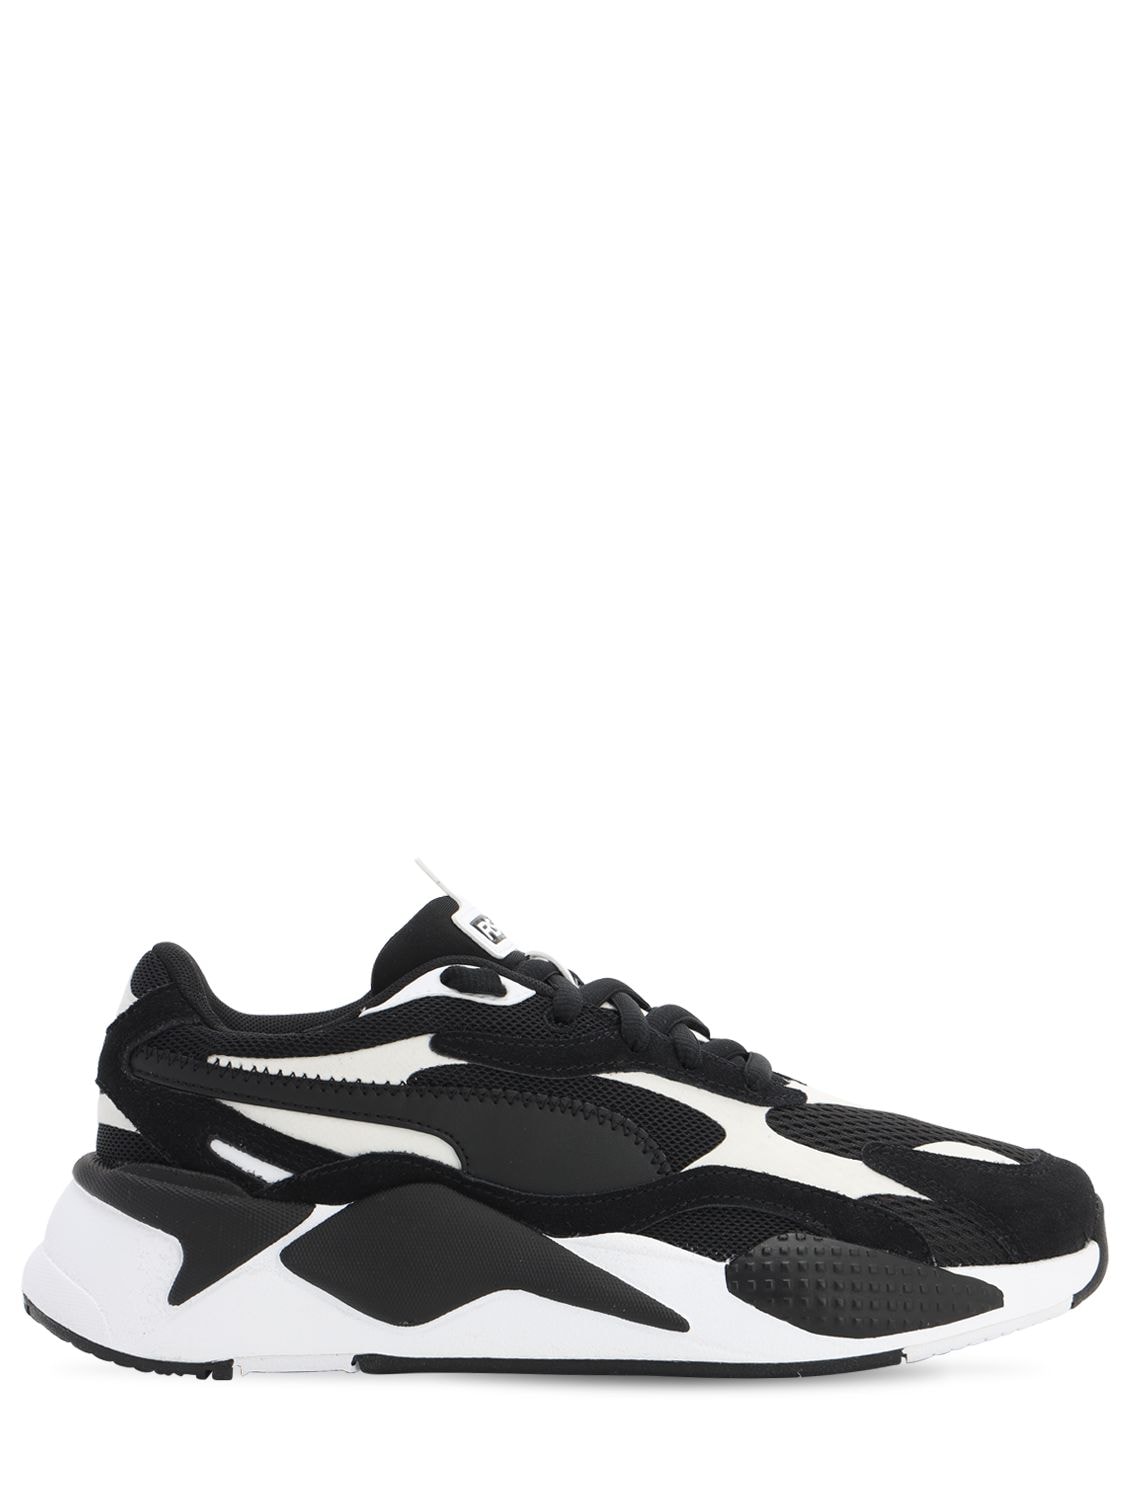 Puma Rs - X3 Play Sneakers In Black,white | ModeSens